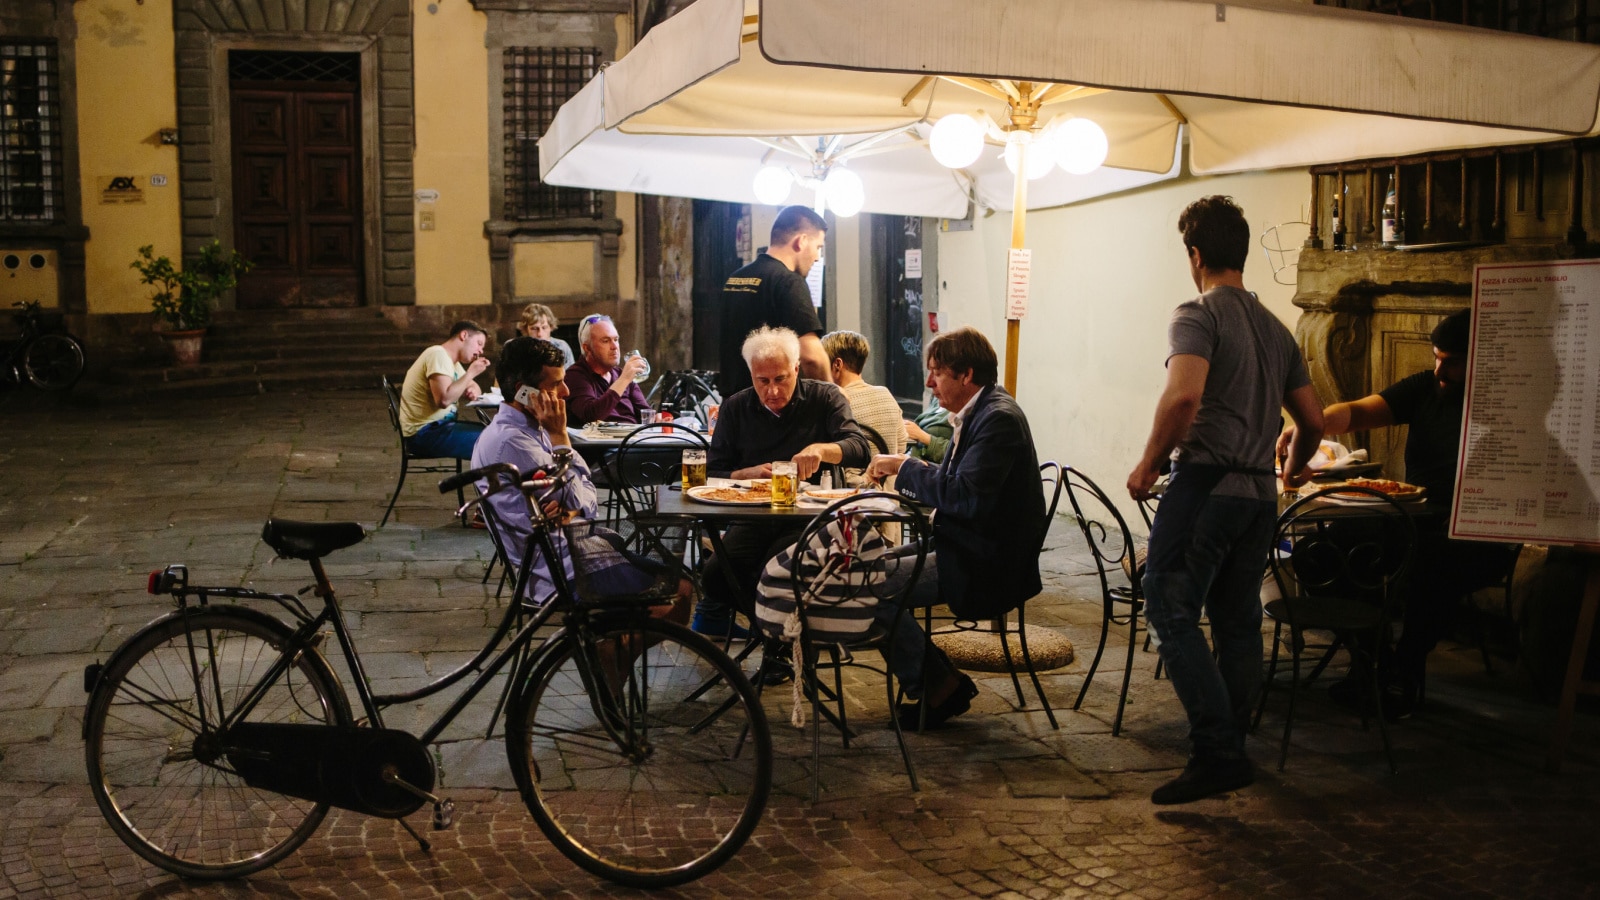 Ascoli Piceno,Italy/ June 2016/ Late night eating in Plaza